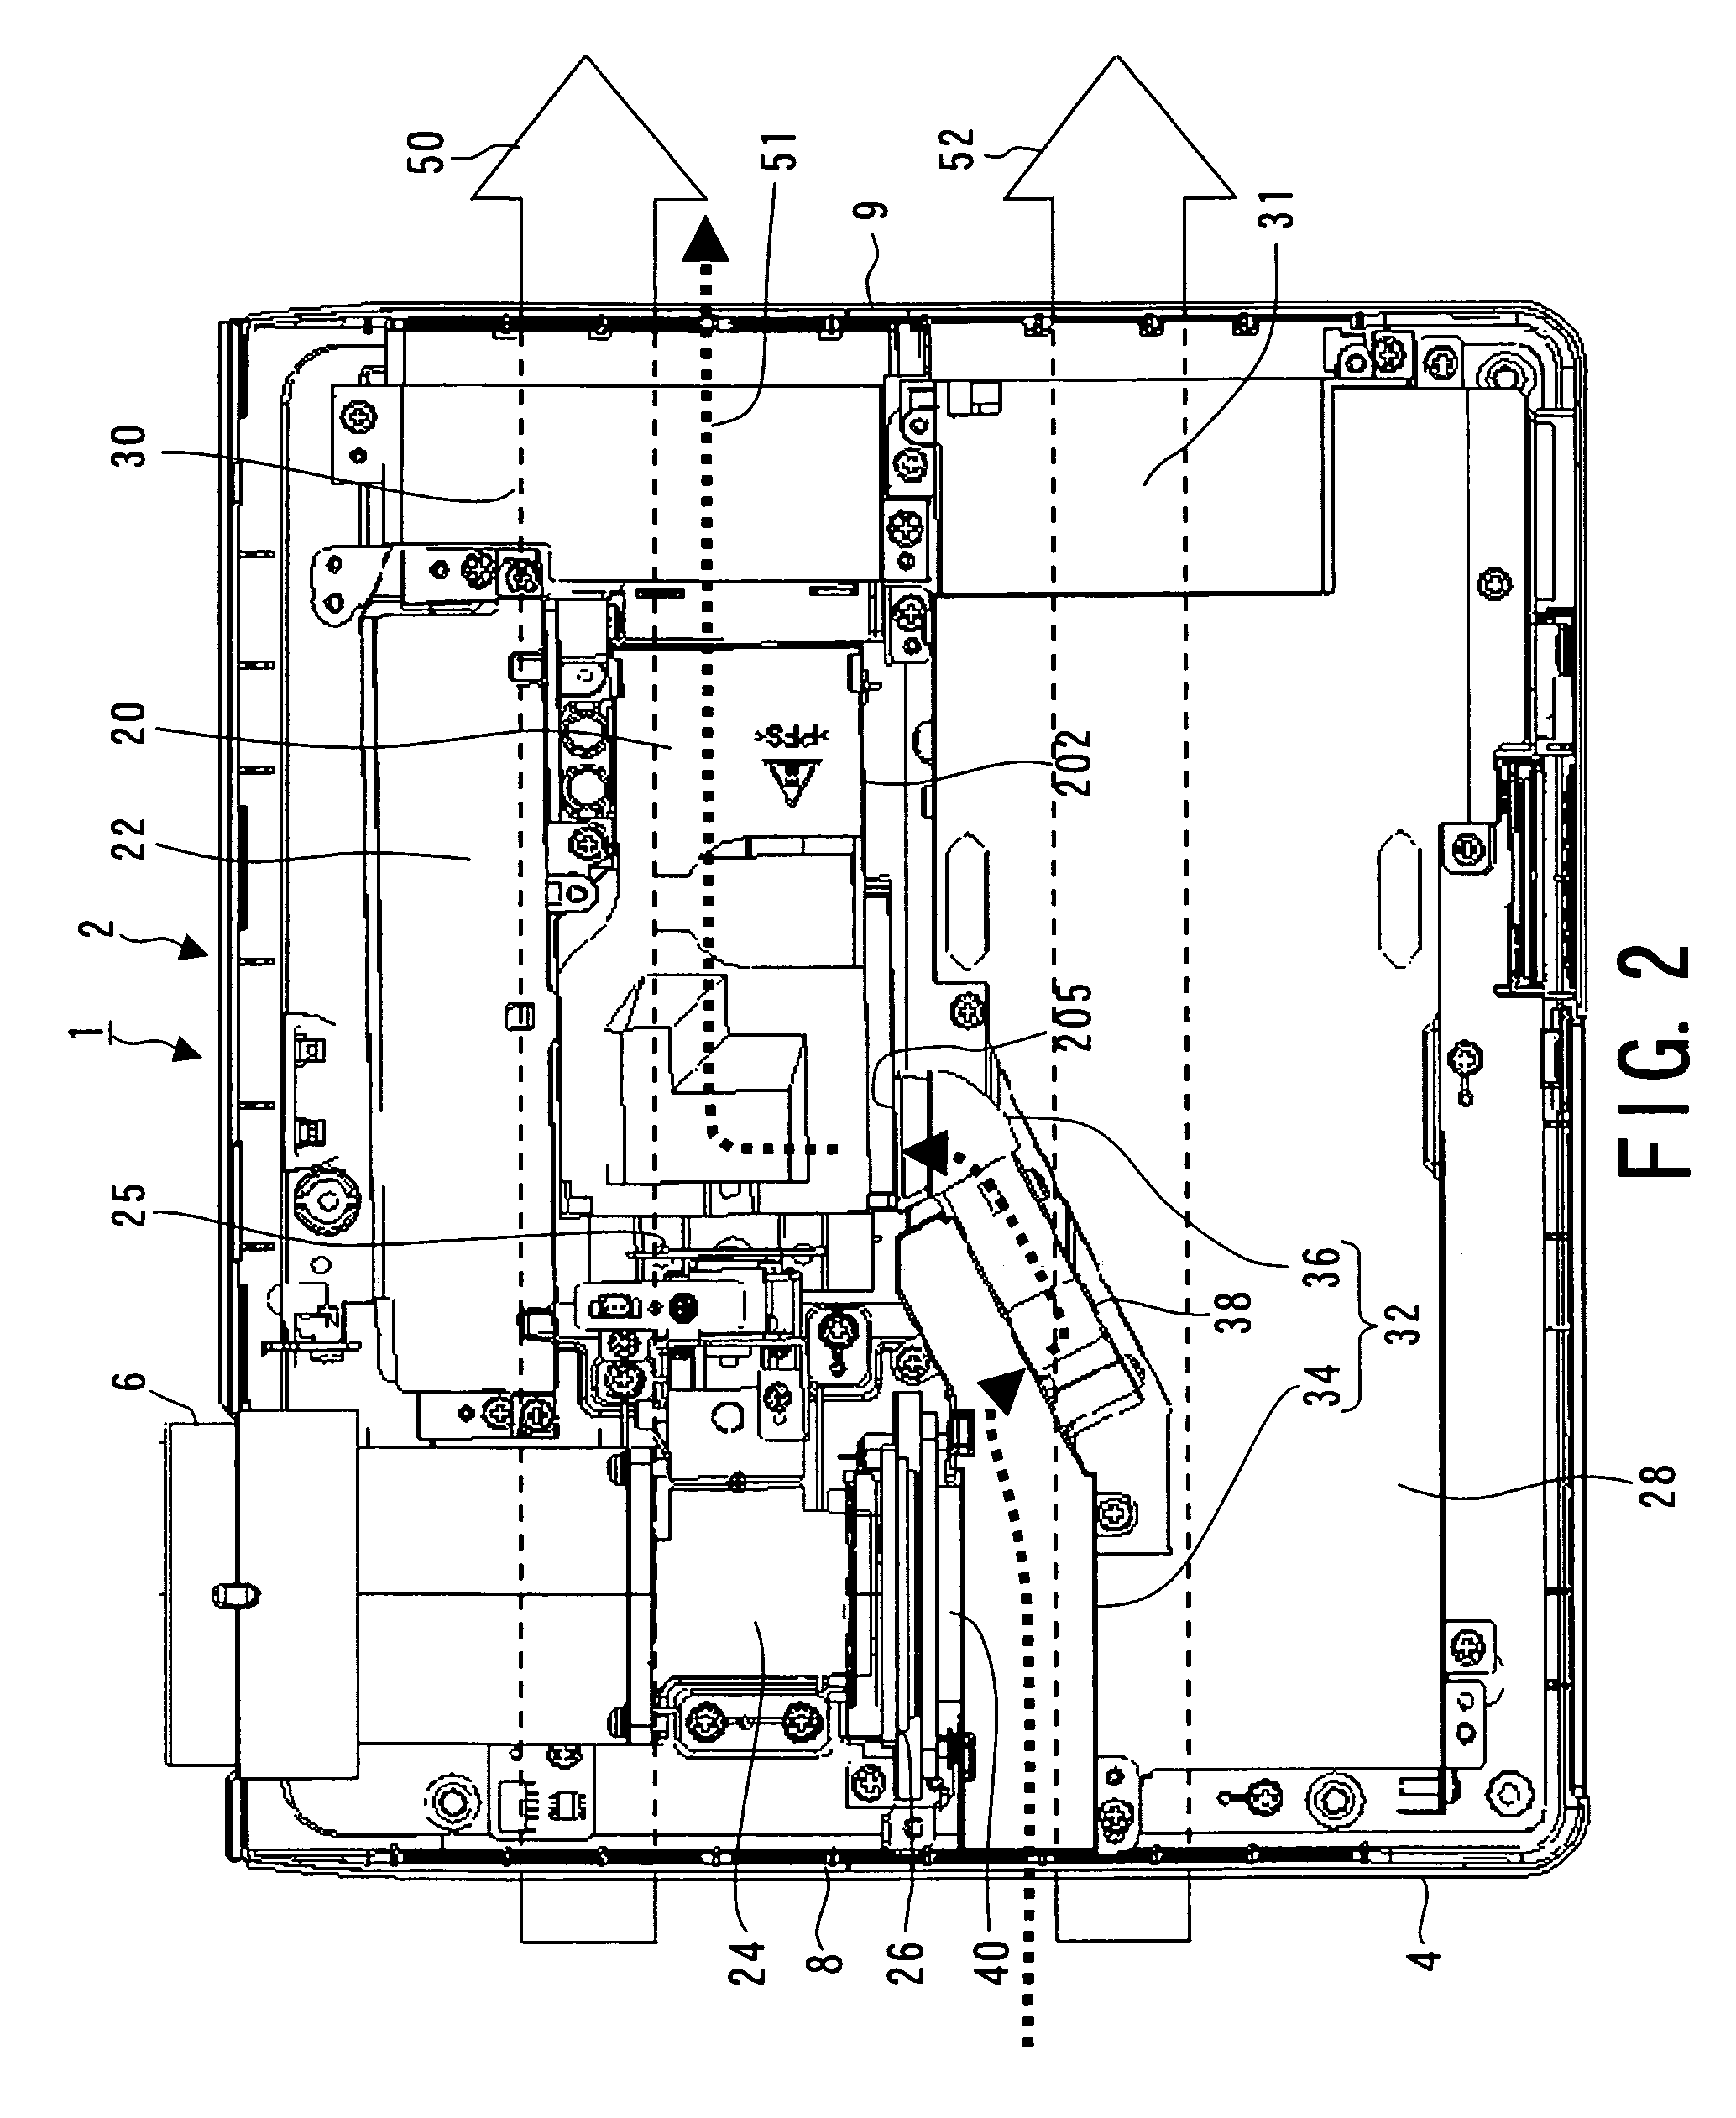 Projection-type image display apparatus